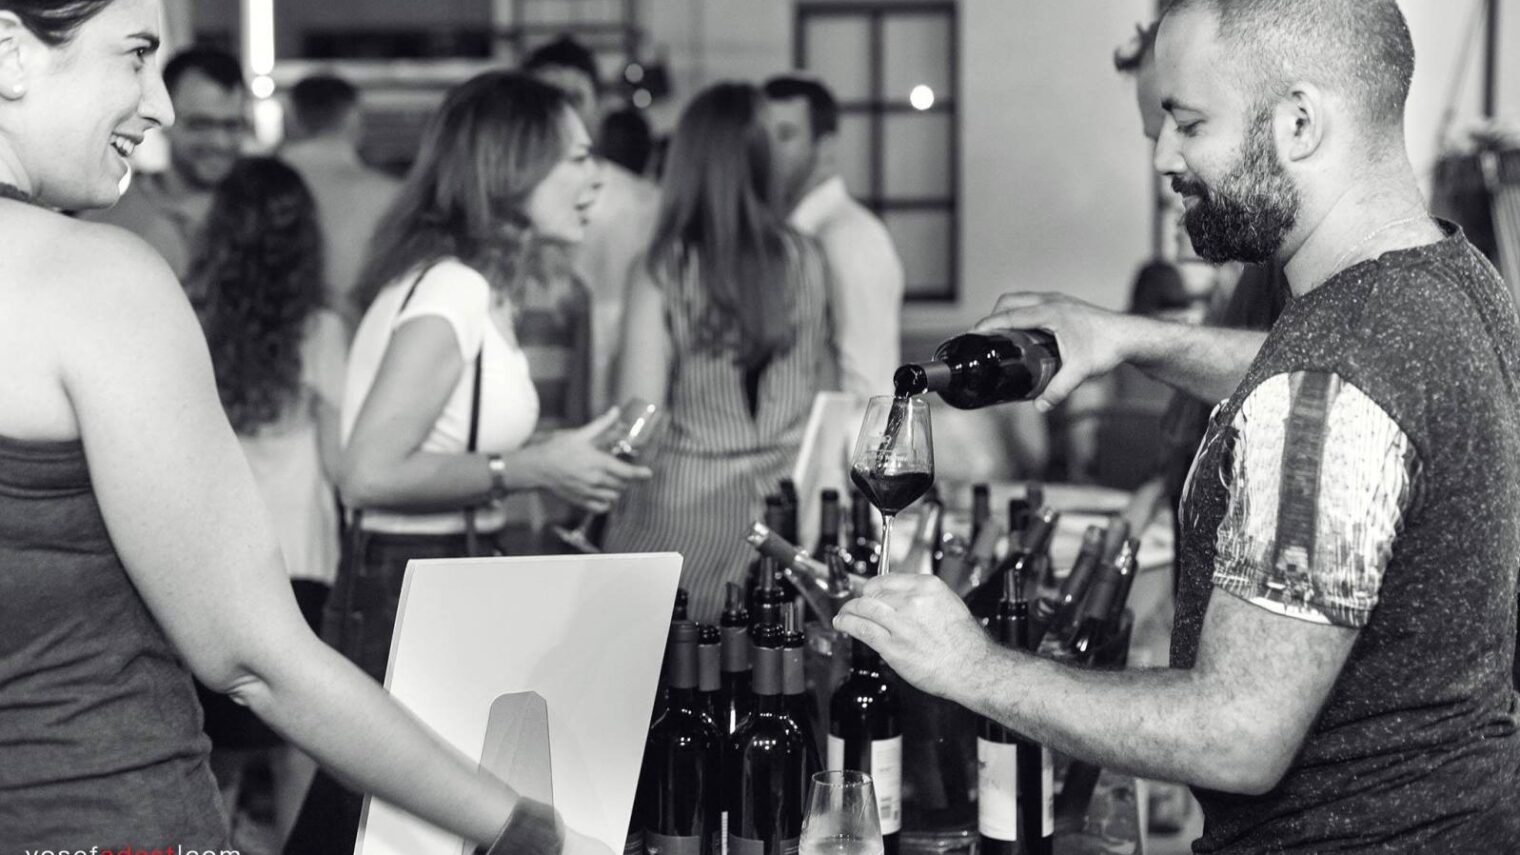 A recent Wine Wednesday event in Jaffa. Photo by Yosef Adest